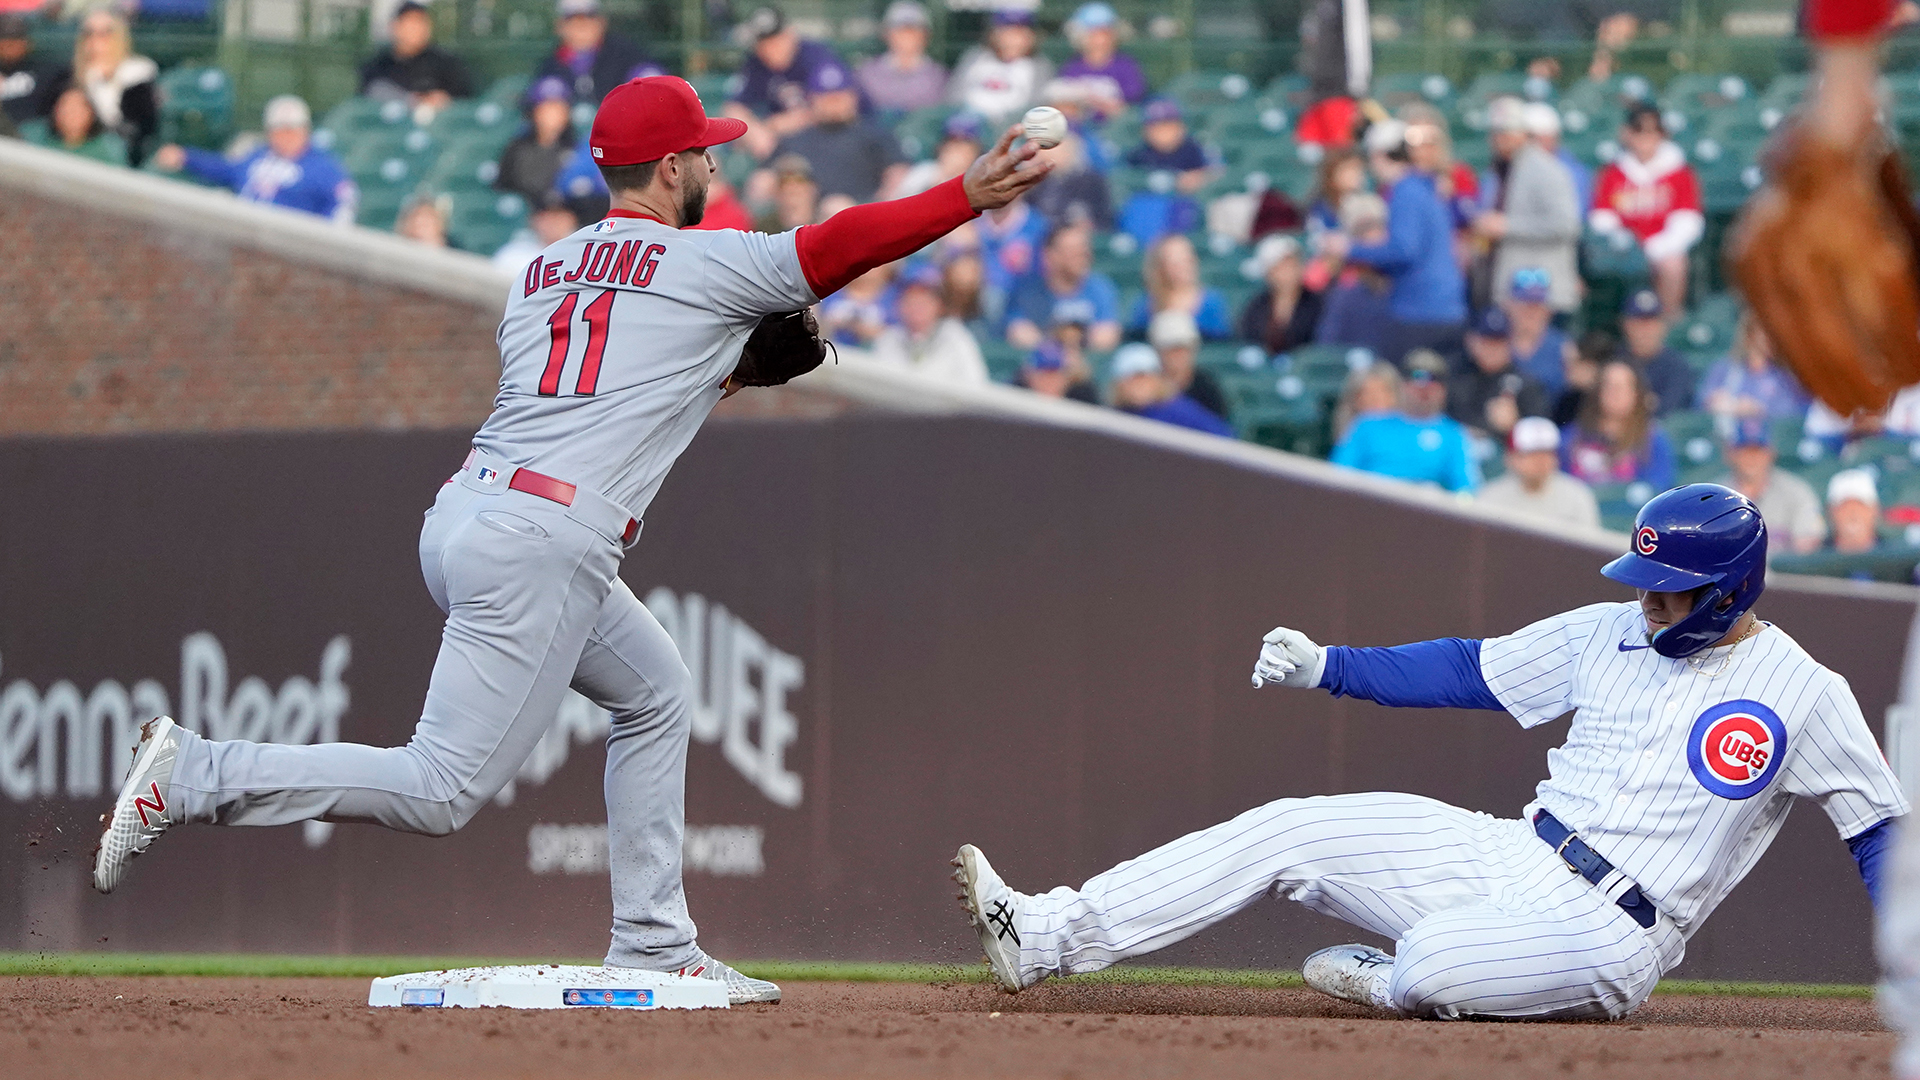 Cardinals outpace Cubs for second straight game – NBC Sports Chicago